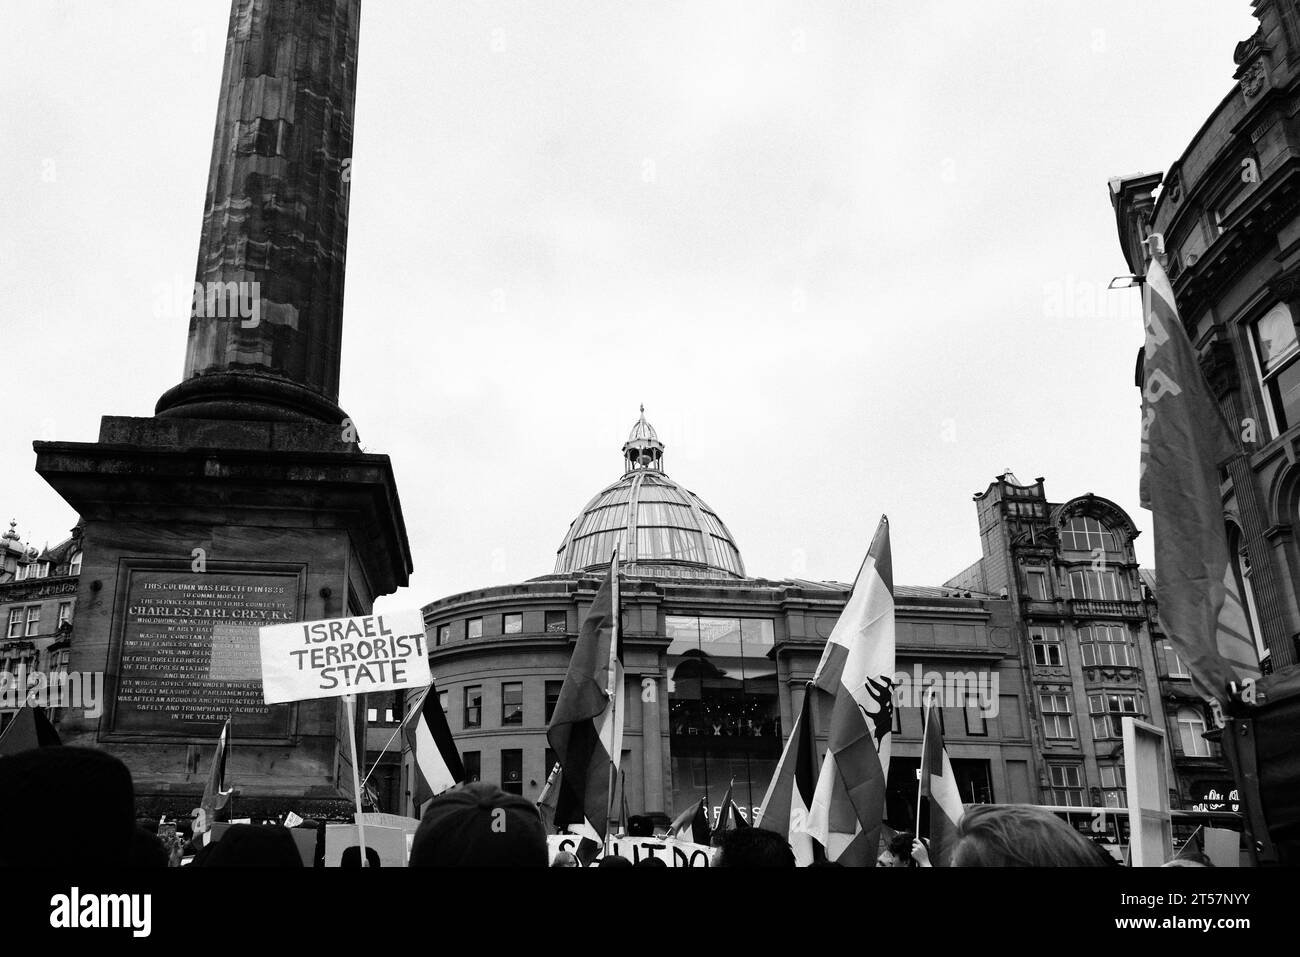 Crowd wave Palestine flags and handmade sign reads 'Israel Terrorist State' at Grey's Monument in Newcastle Upon Tyne, England, UK - Oct 28 2023. Stock Photo